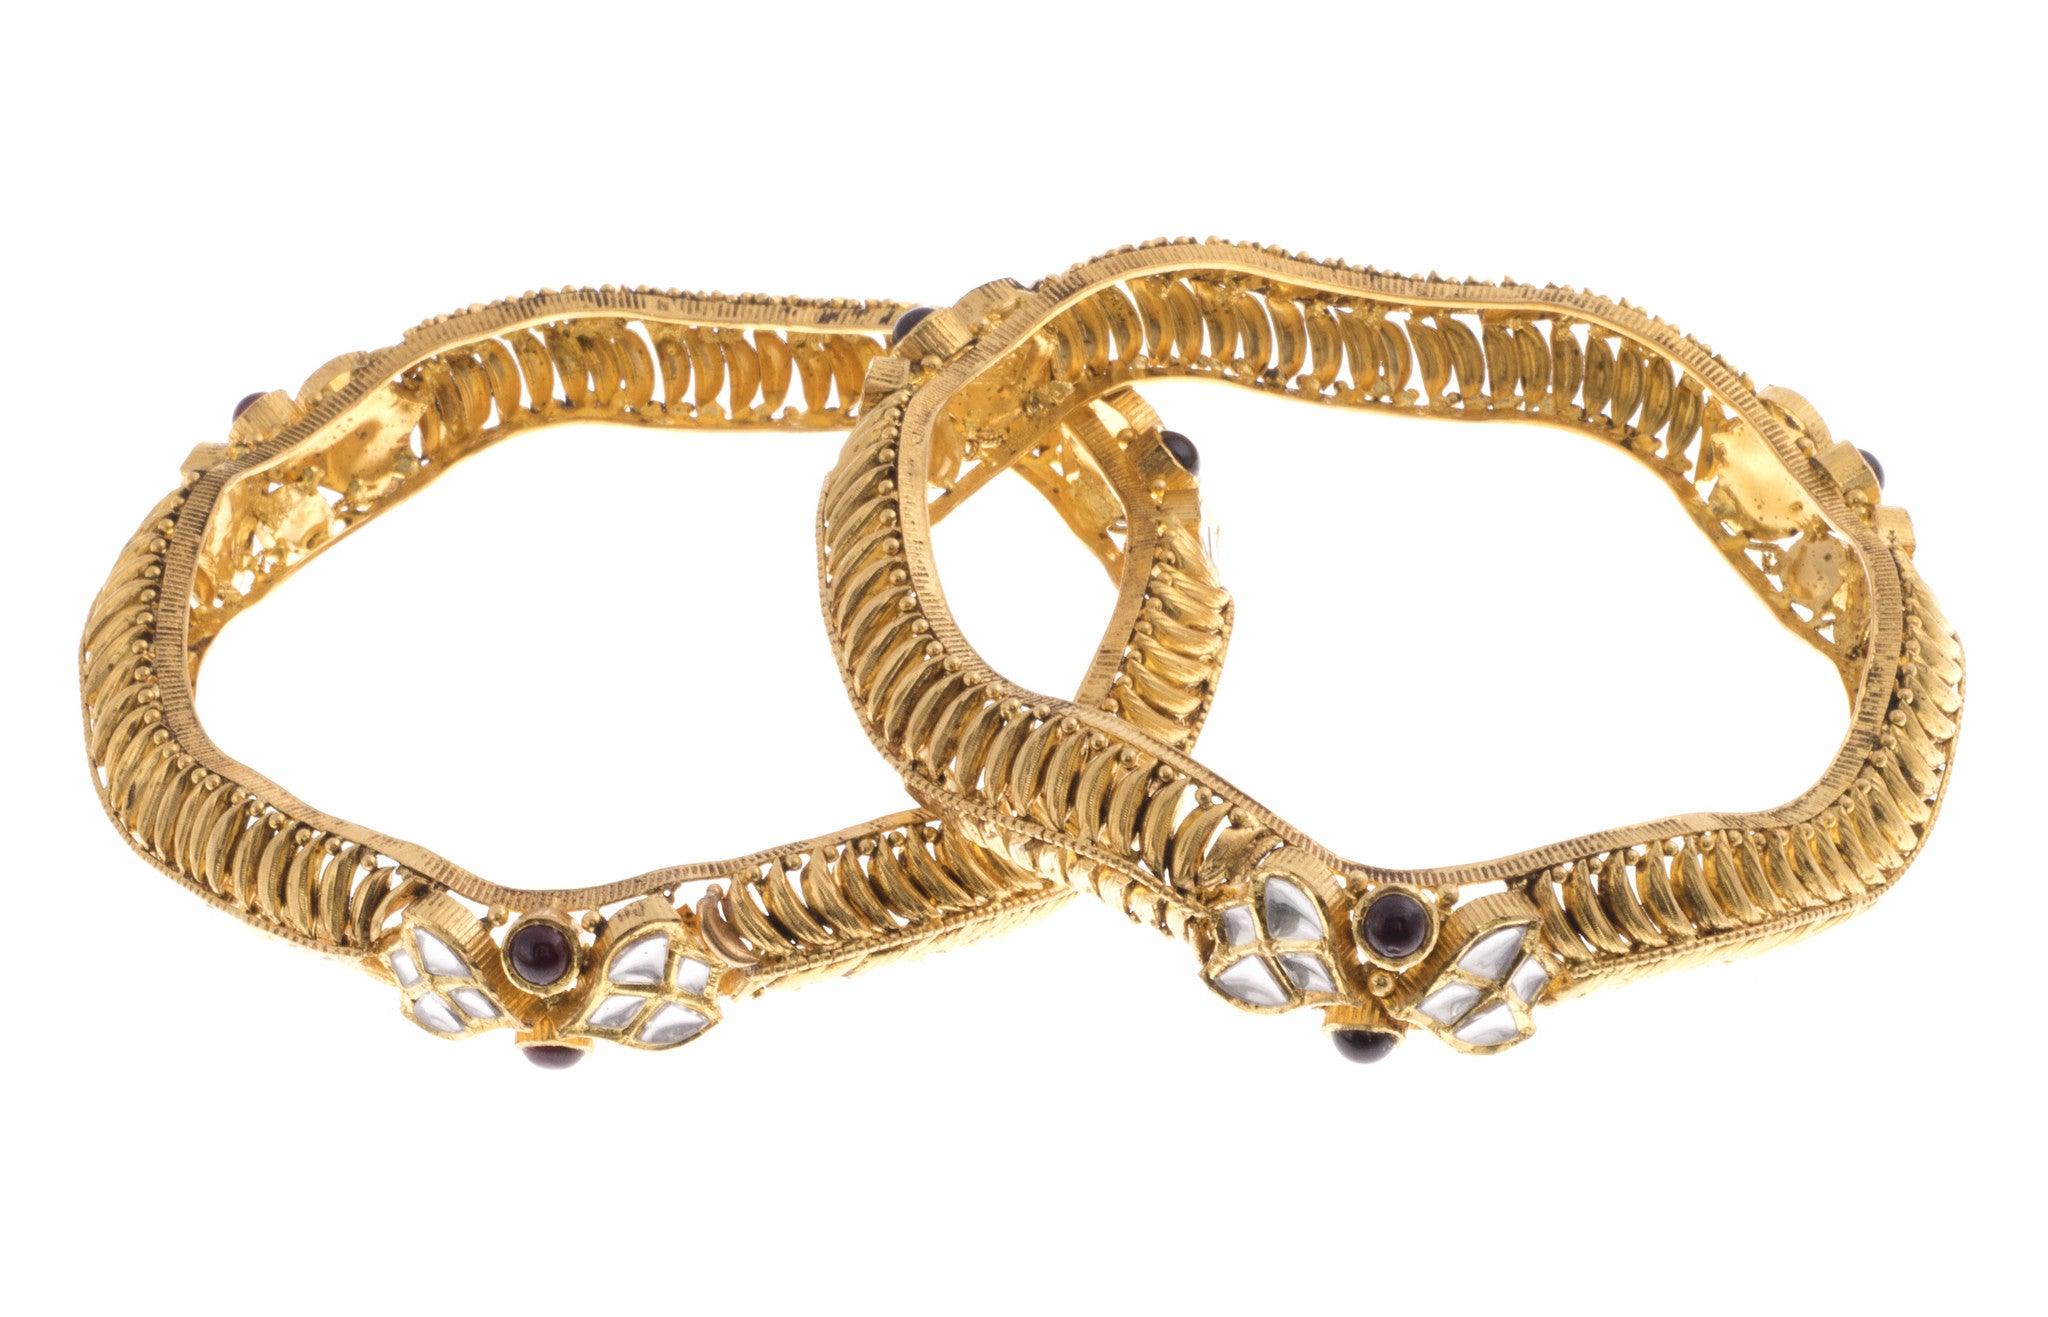 22ct Yellow Gold Antique Look Bangle with Synthetic Stones (G1753), Minar Jewellers - 5